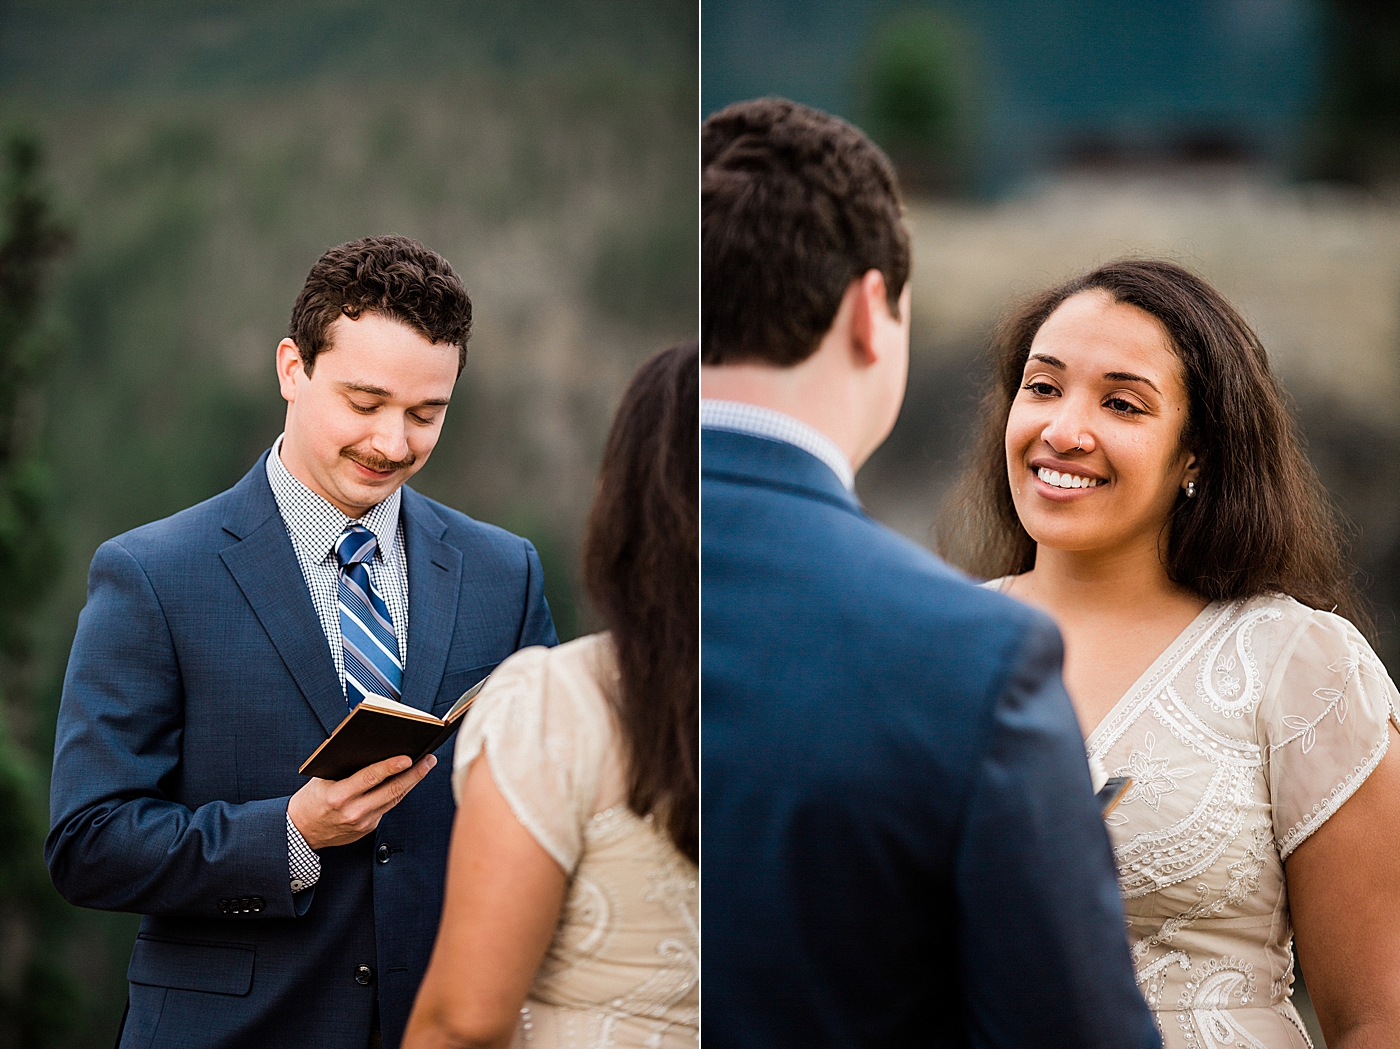 Bride and groom exchange vows at intimate elopement ceremony at Diablo Lake. Photographed by Washington Elopement Photographer, Megan Montalvo Photography. 